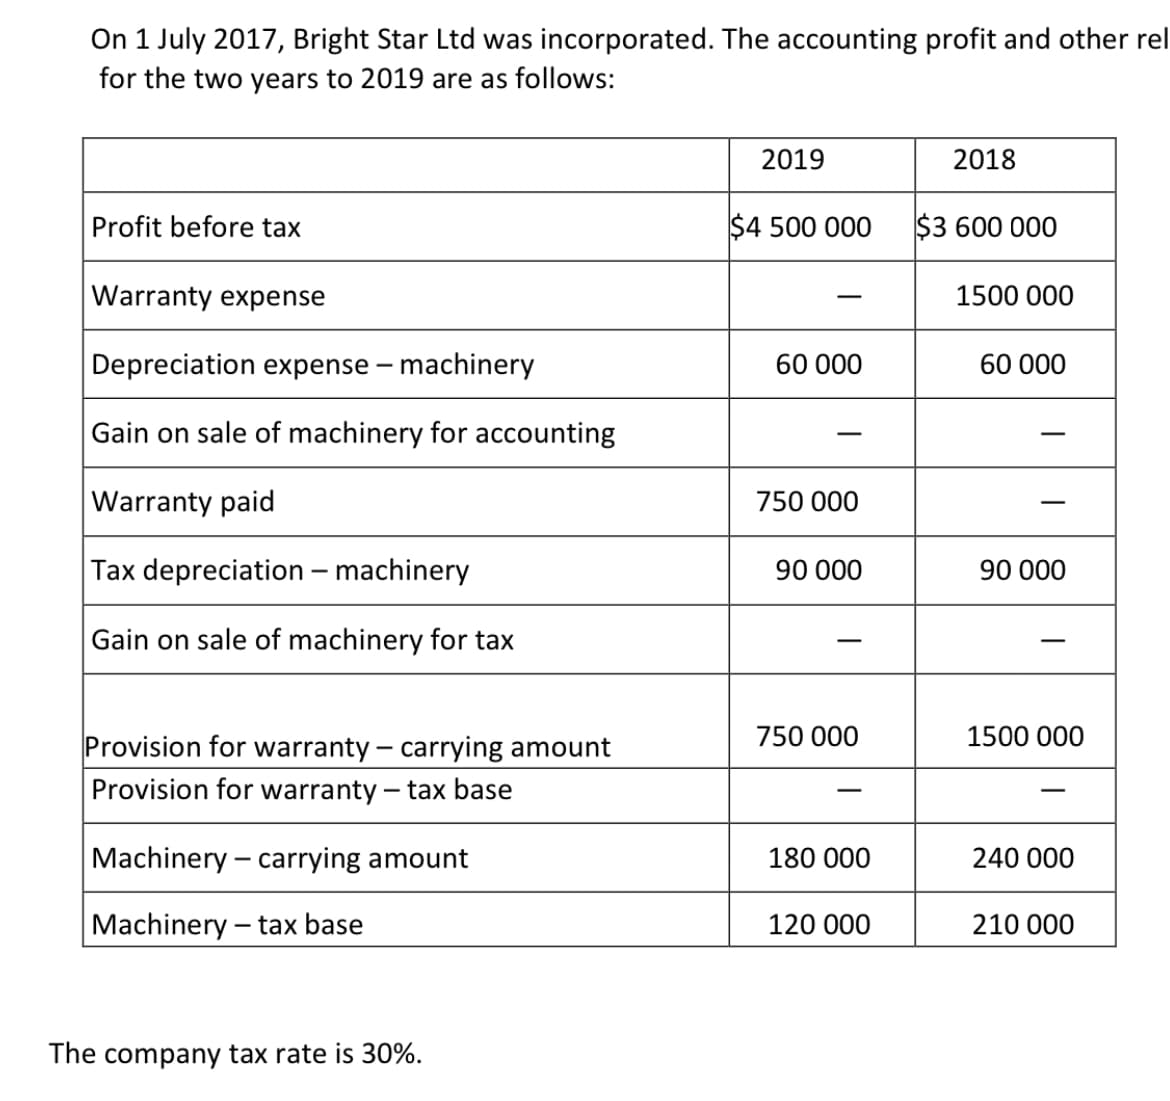 On 1 July 2017, Bright Star Ltd was incorporated. The accounting profit and other rel
for the two years to 2019 are as follows:
2019
2018
Profit before tax
$4 500 000
$3 600 000
Warranty expense
1500 000
Depreciation expense – machinery
60 000
60 000
Gain on sale of machinery for accounting
|
|
Warranty paid
750 000
-
Tax depreciation – machinery
90 000
90 000
Gain on sale of machinery for tax
-
|
750 000
1500 000
Provision for warranty – carrying amount
Provision for warranty – tax base
-
Machinery – carrying amount
180 000
240 000
Machinery – tax base
120 000
210 000
The company tax rate is 30%.
